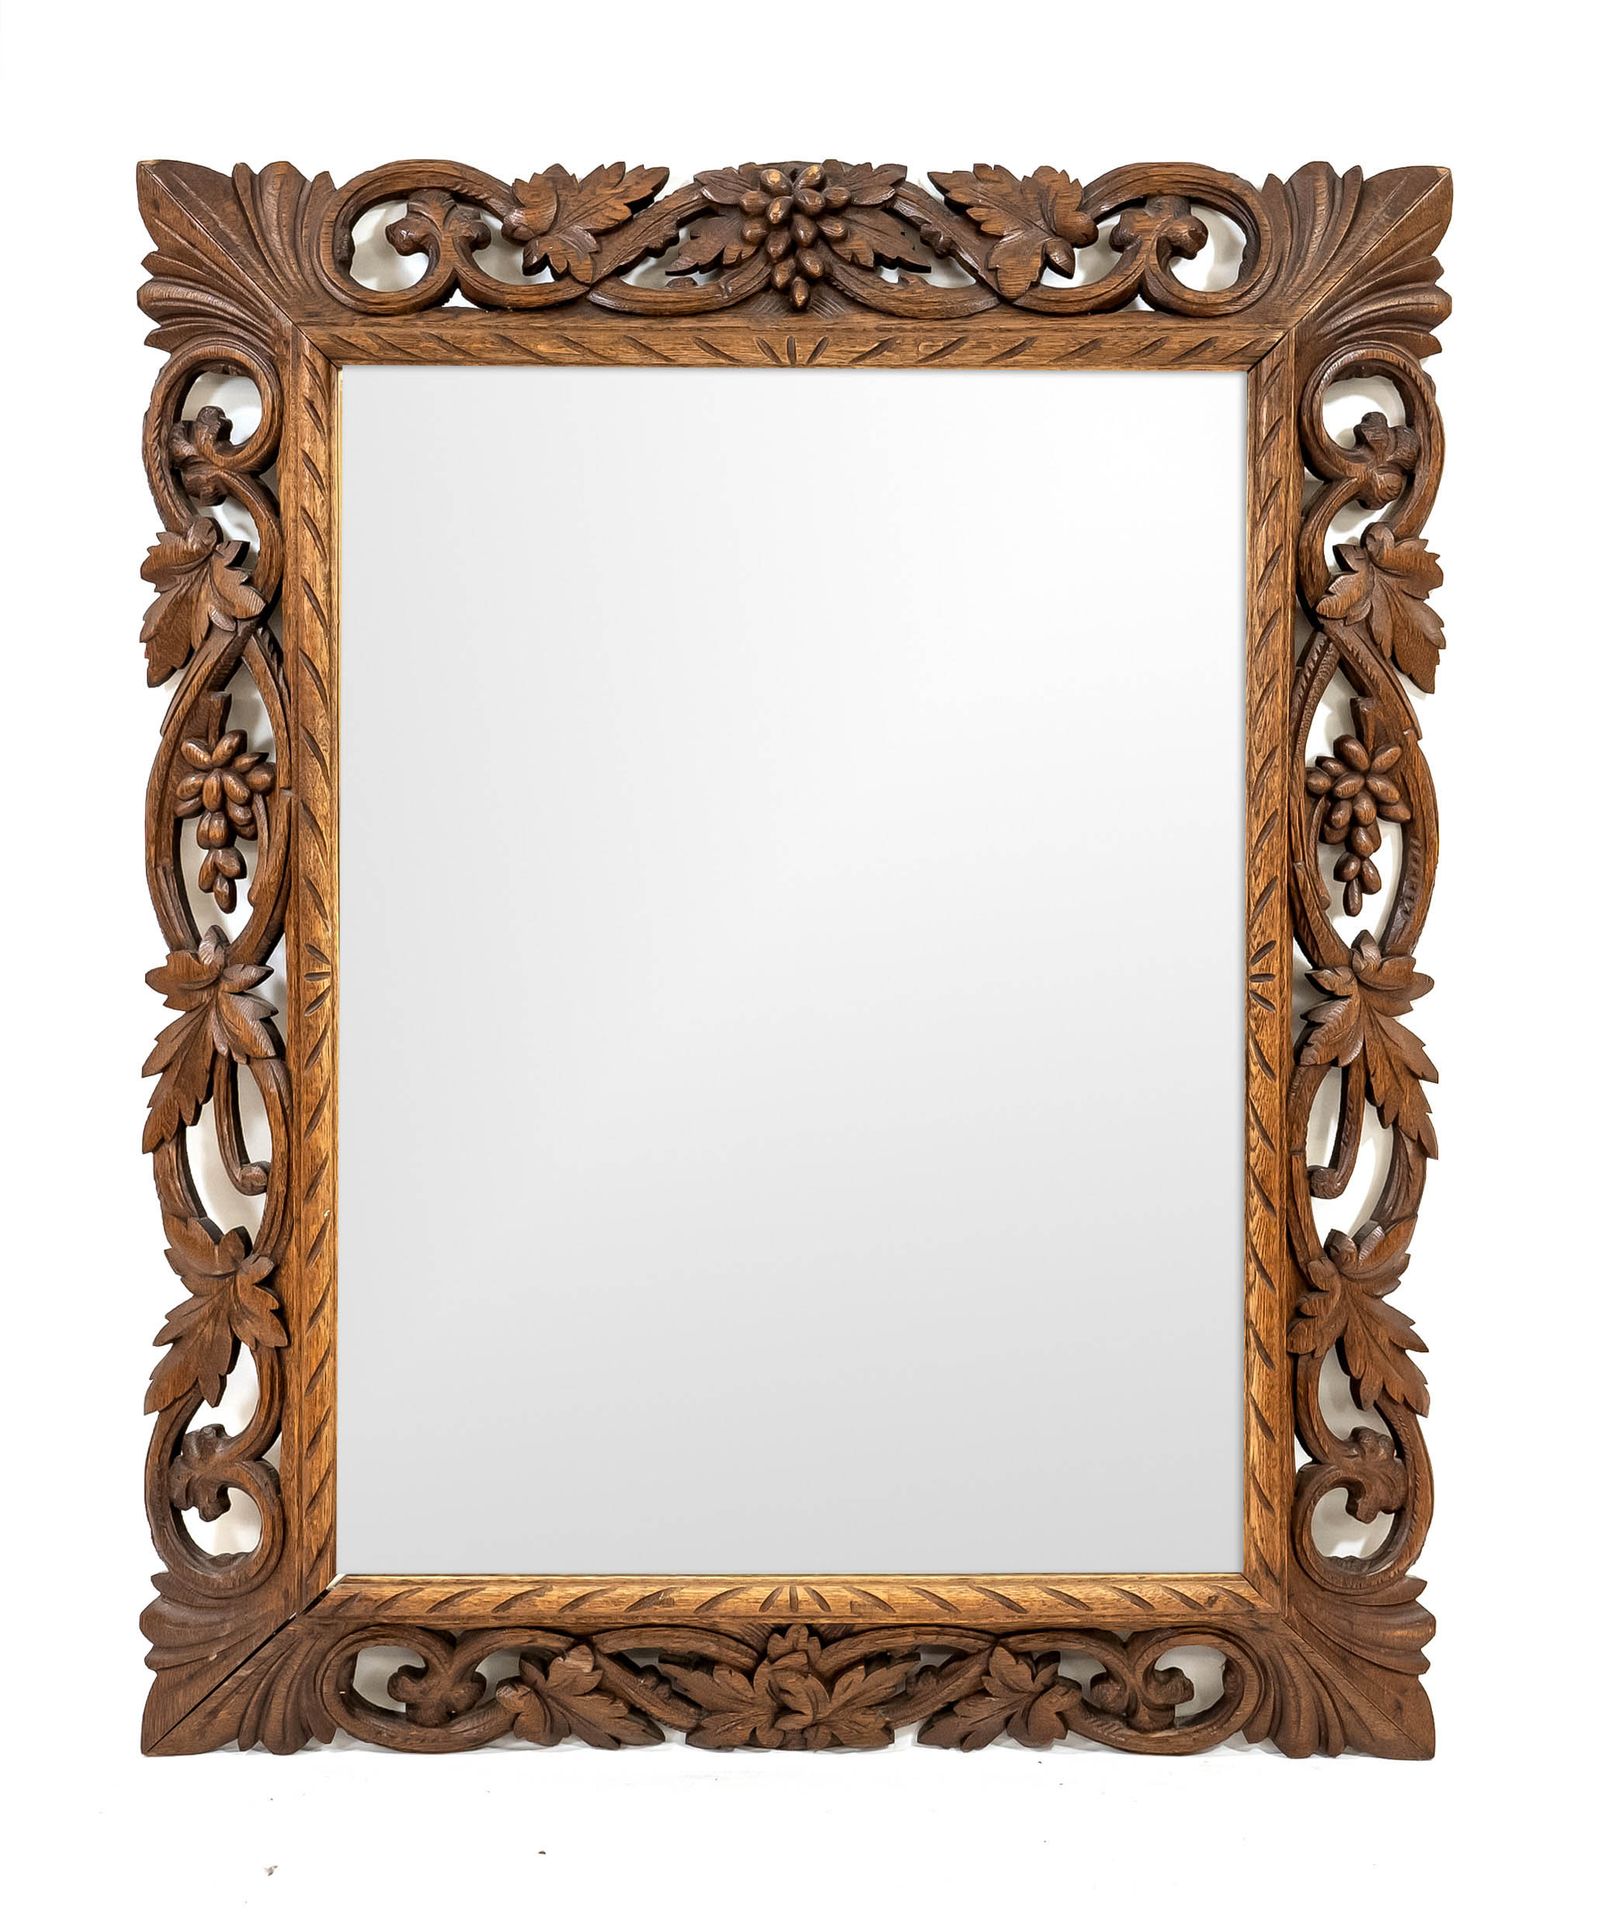 Null Wall mirror circa 1880, solid oak, carved wooden frame, 115 x 92 cm.